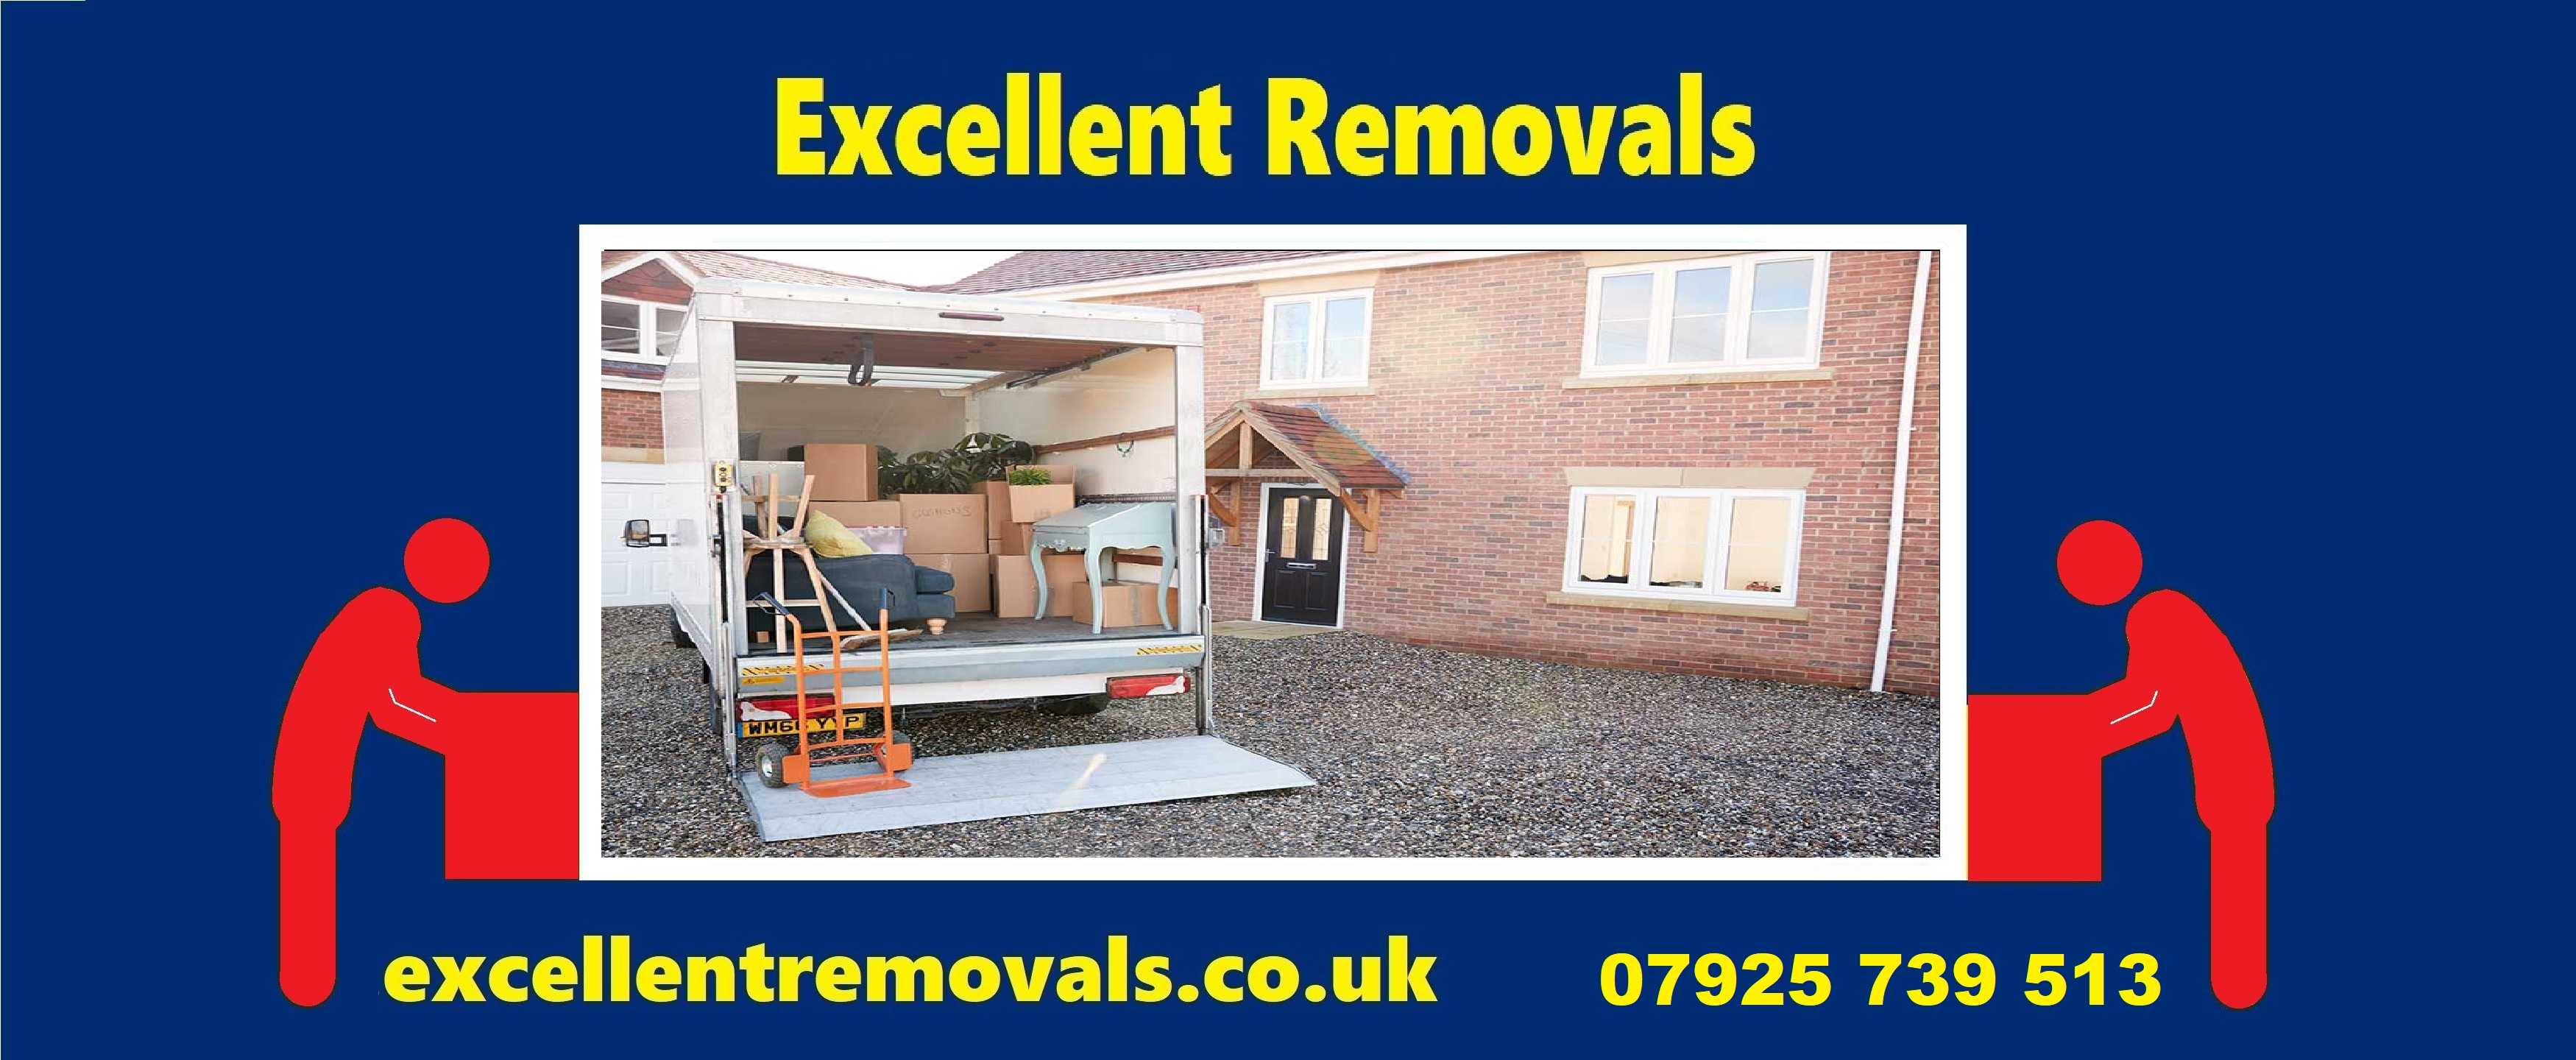 Excellent Removals